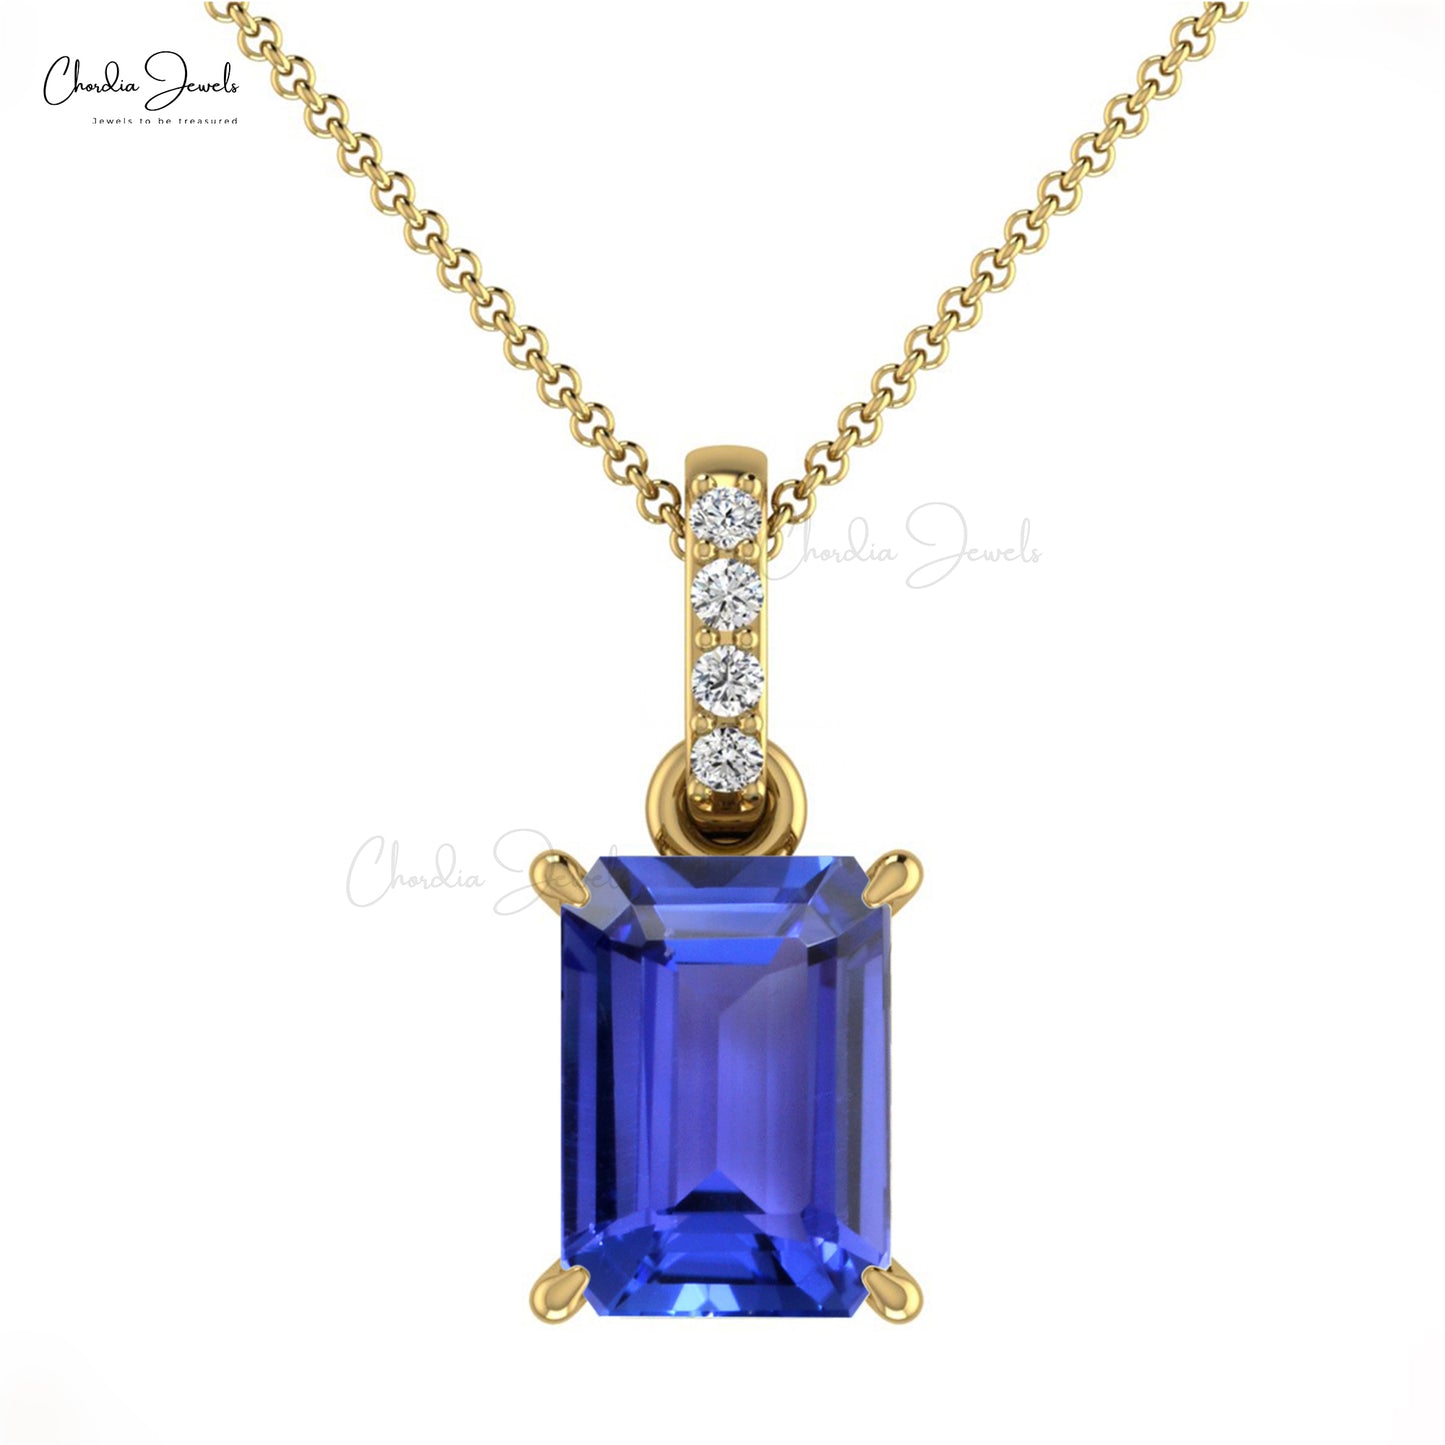 Classic Handmade Natural White Diamond Dangling Pendant 7x5mm Octagon Tanzanite Gemstone Pendant Necklace 14k Pure Gold Jewelry For Her